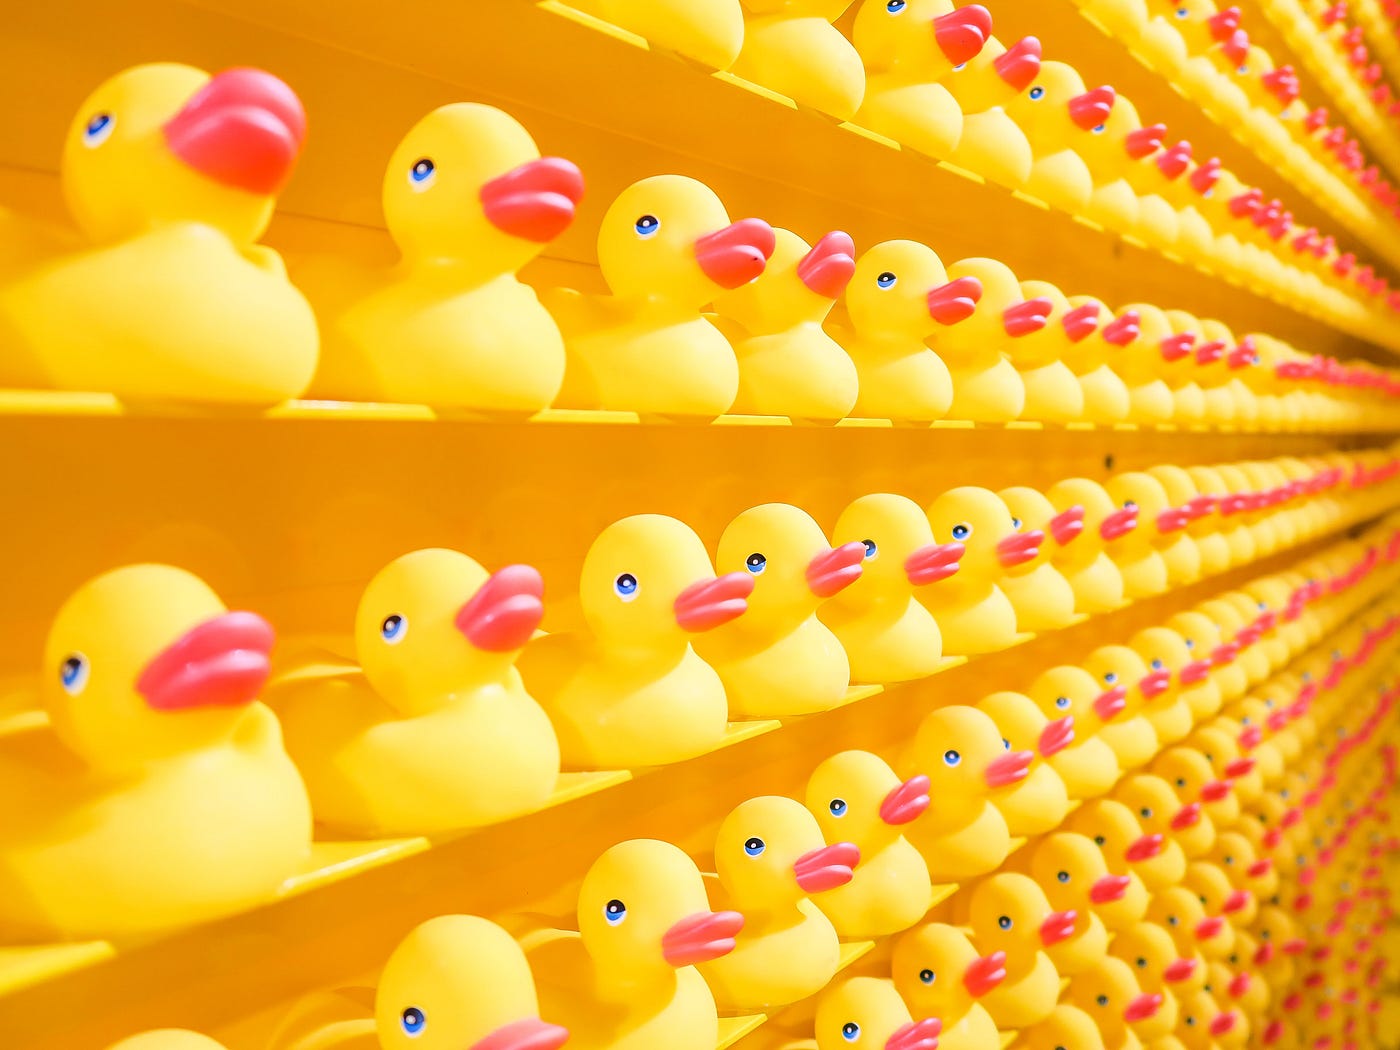 Why Rubber Ducking is One of Your Greatest Resources as a